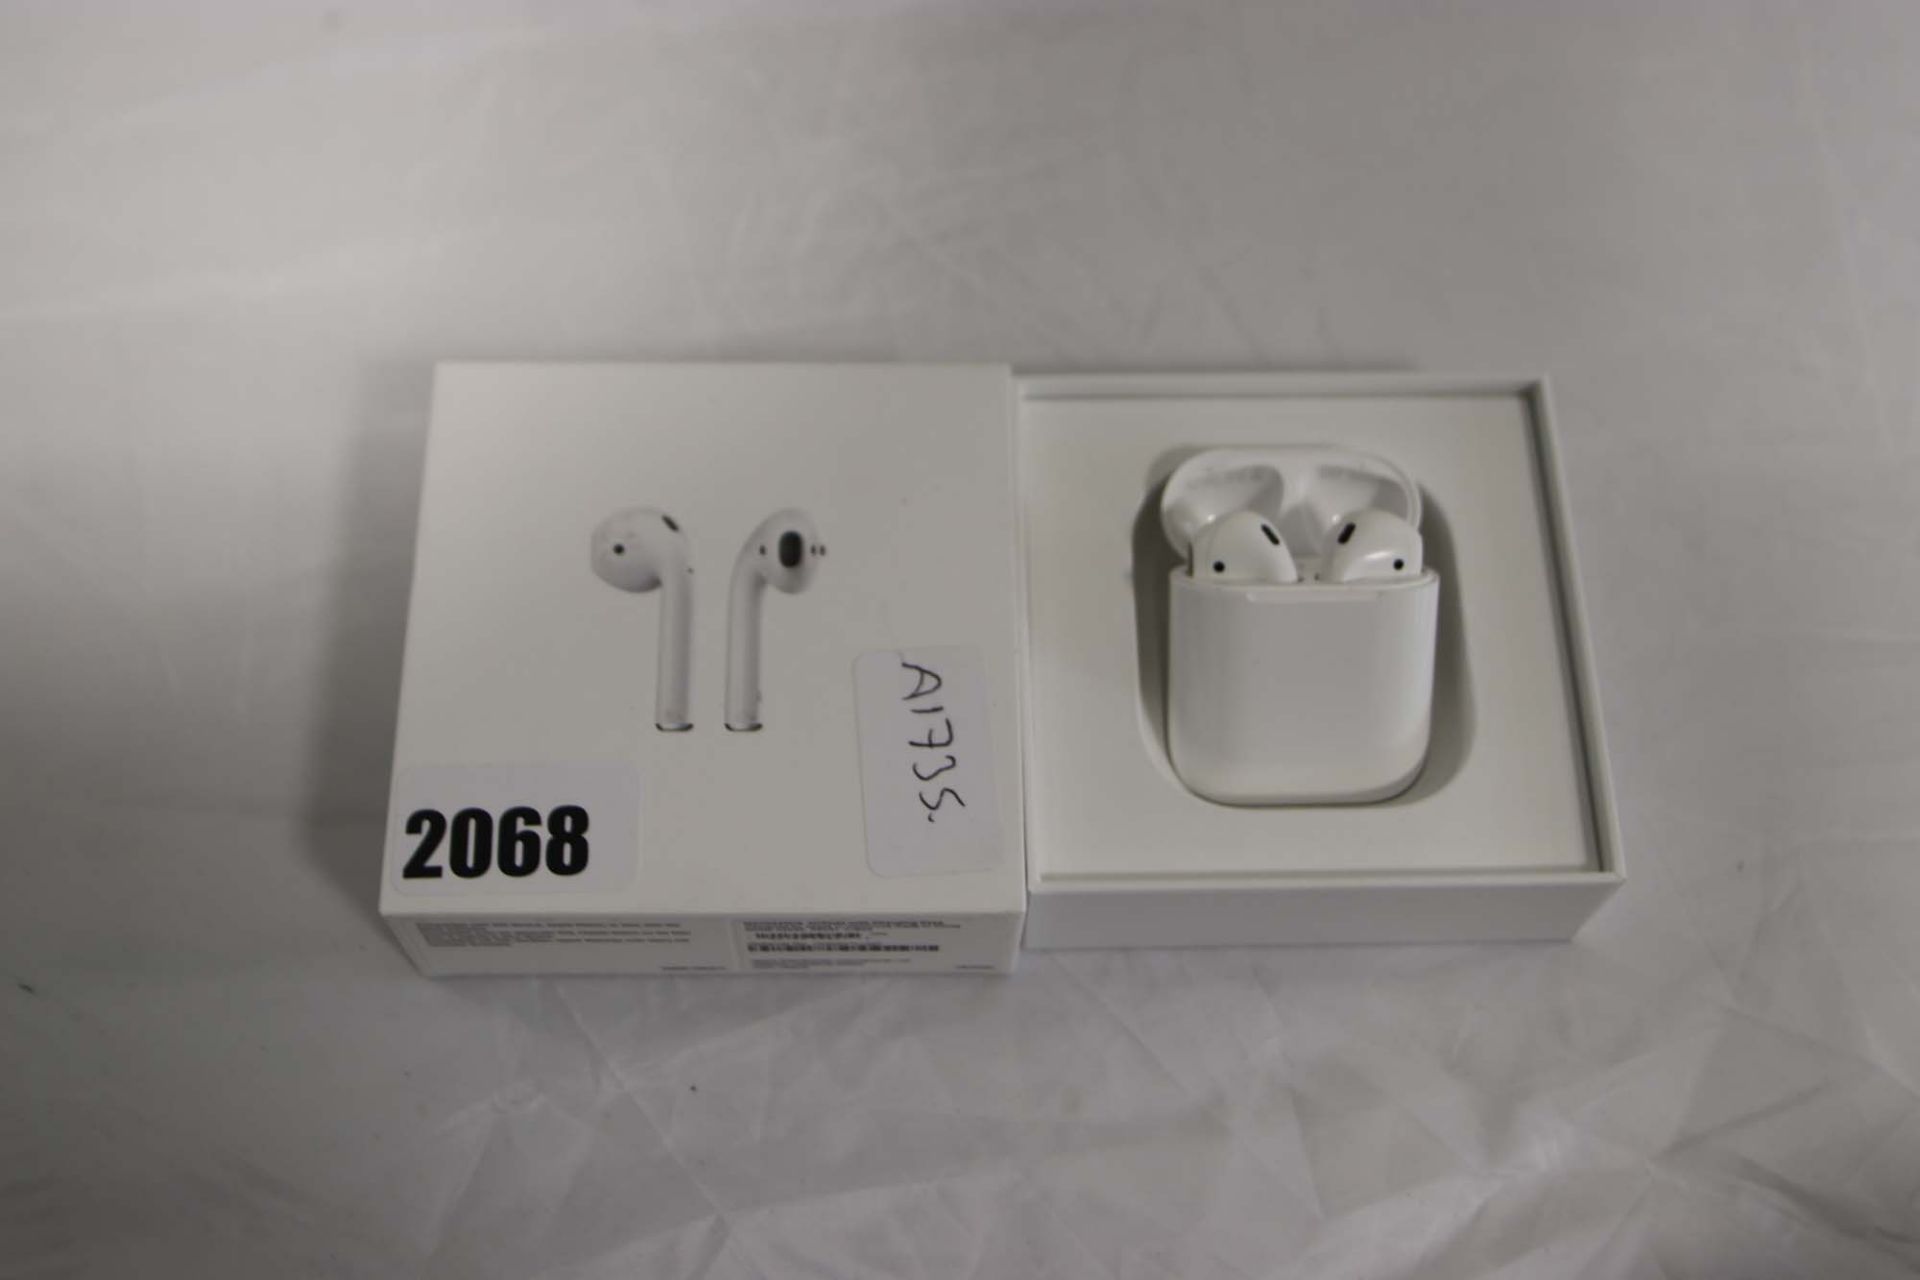 Pair of Apple AirPods